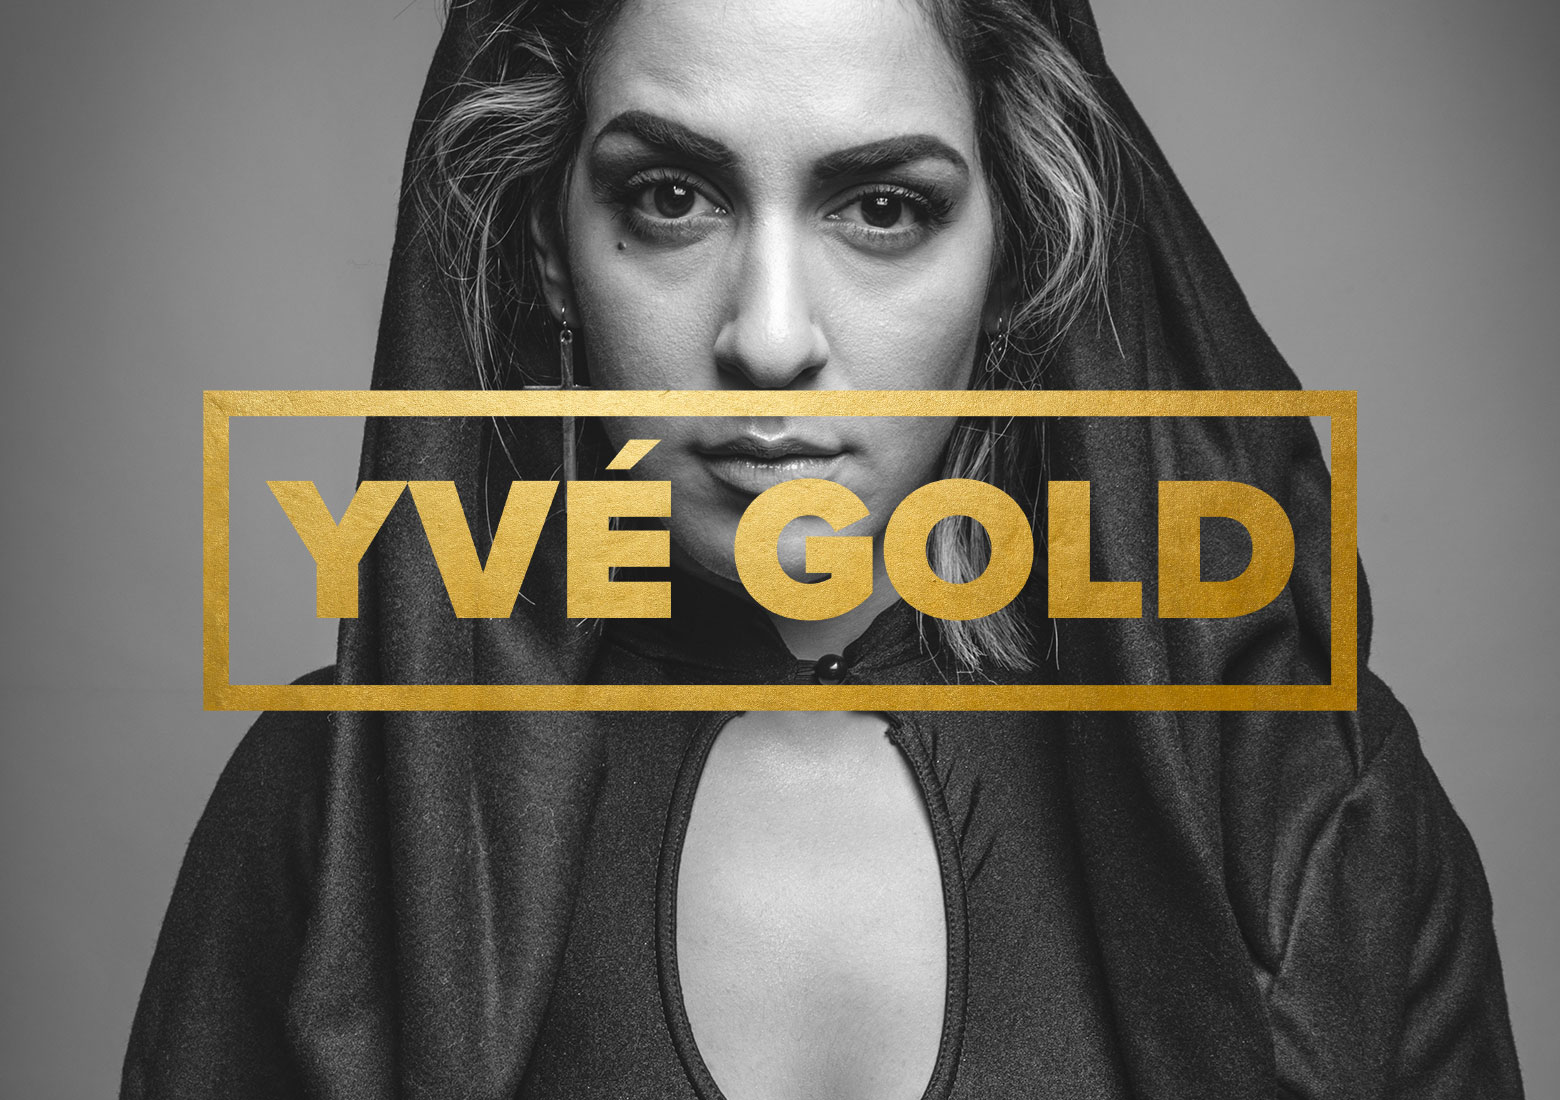 Yve Gold website and branding by Rising Creative